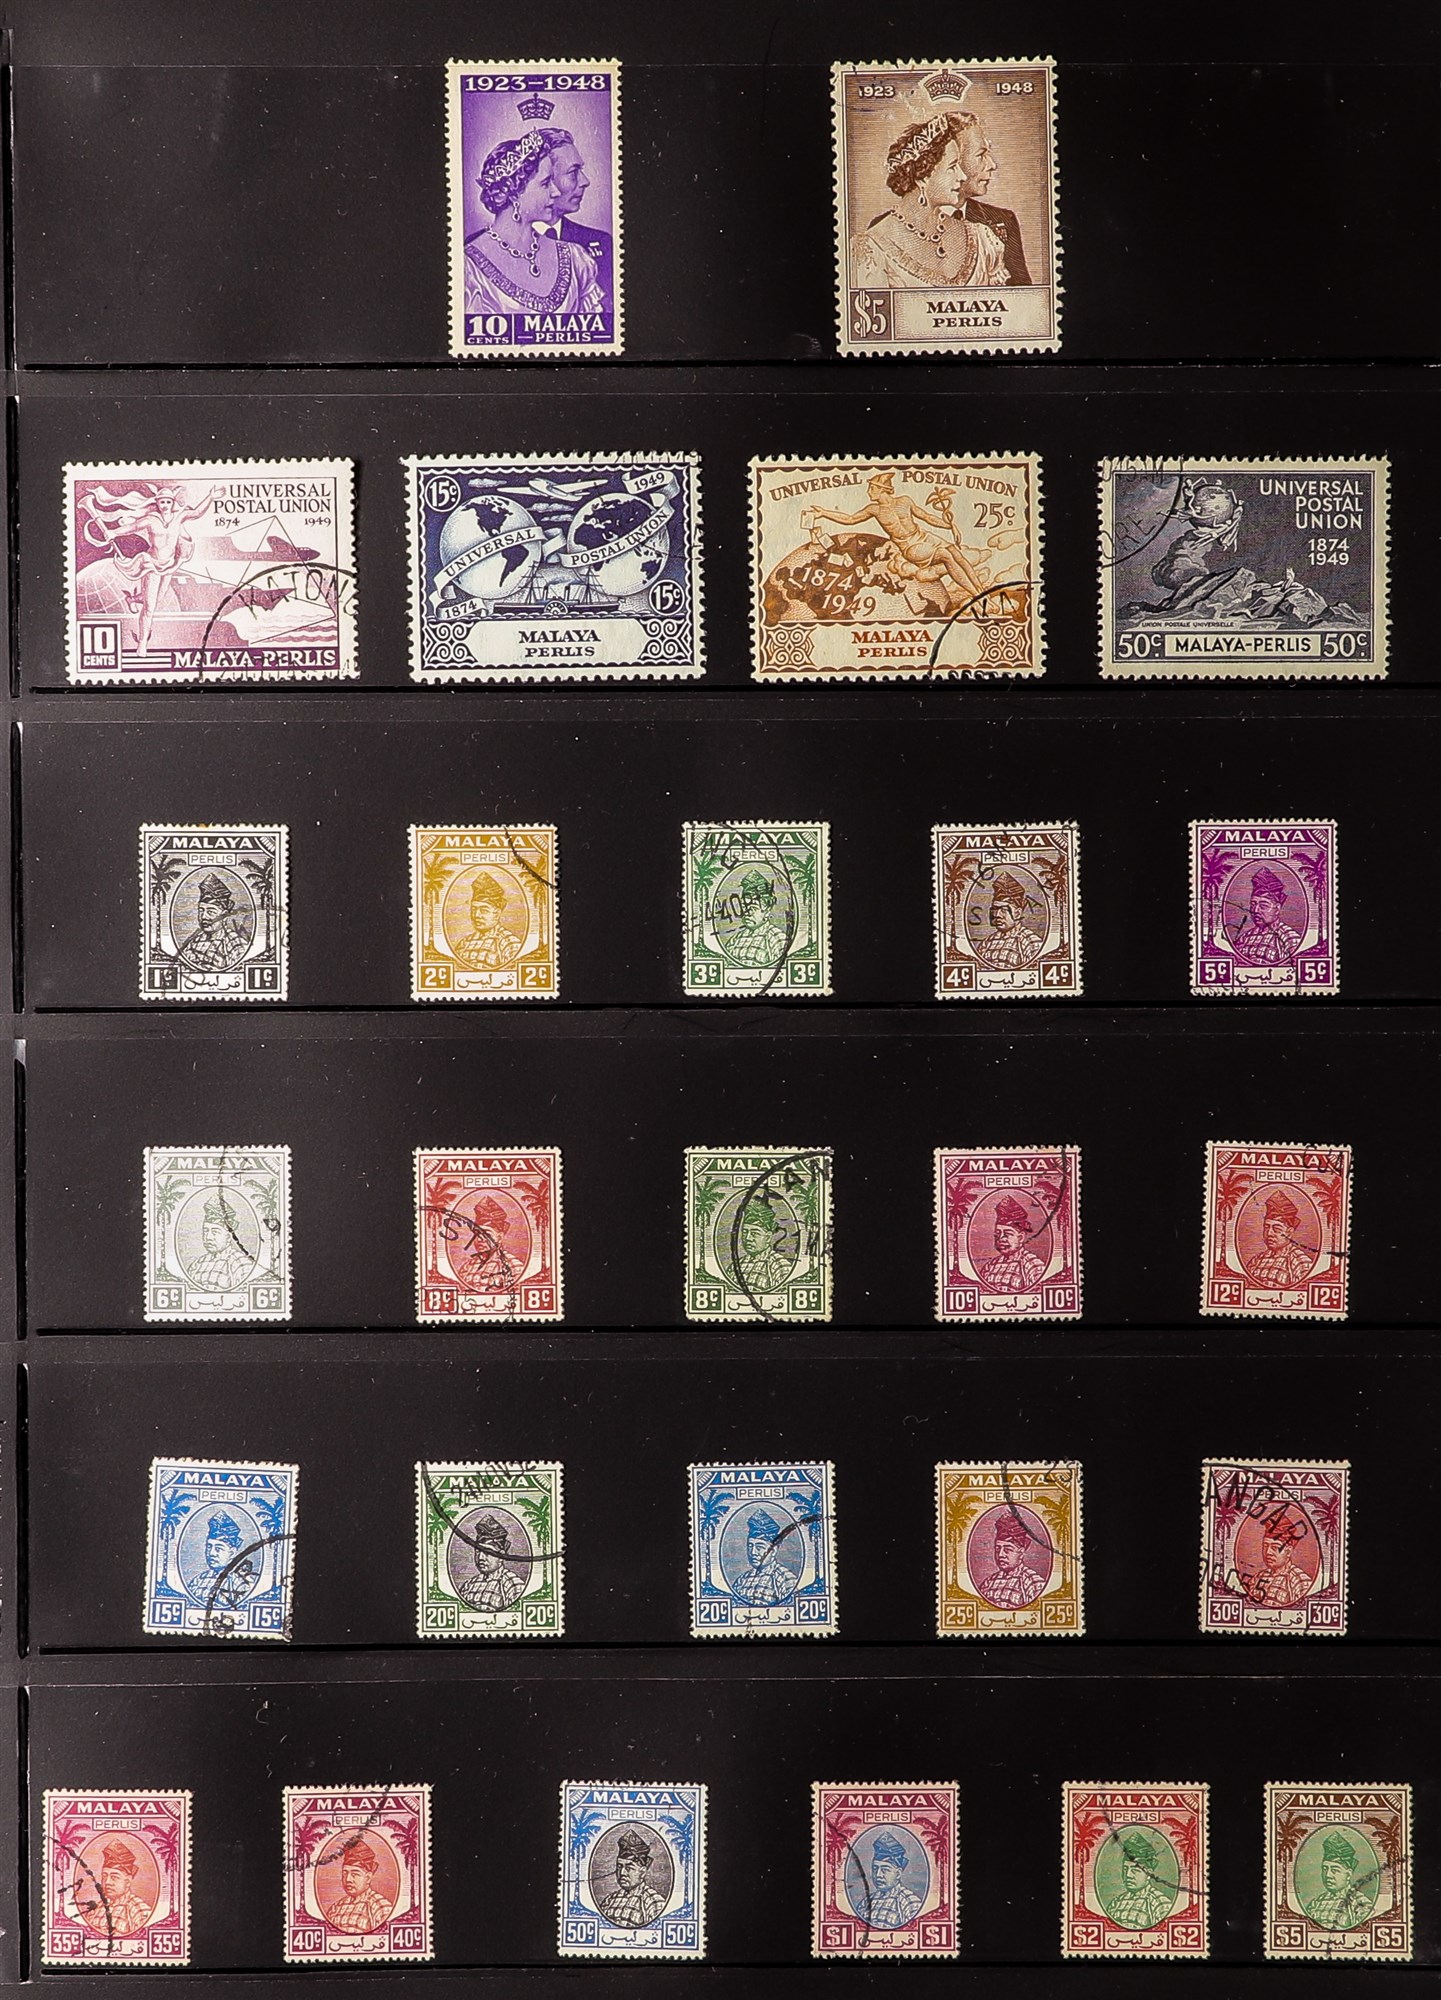 MALAYA STATES PERLIS 1948 - 1968 used collection complete from 1948 Wedding to the 1965 Floral